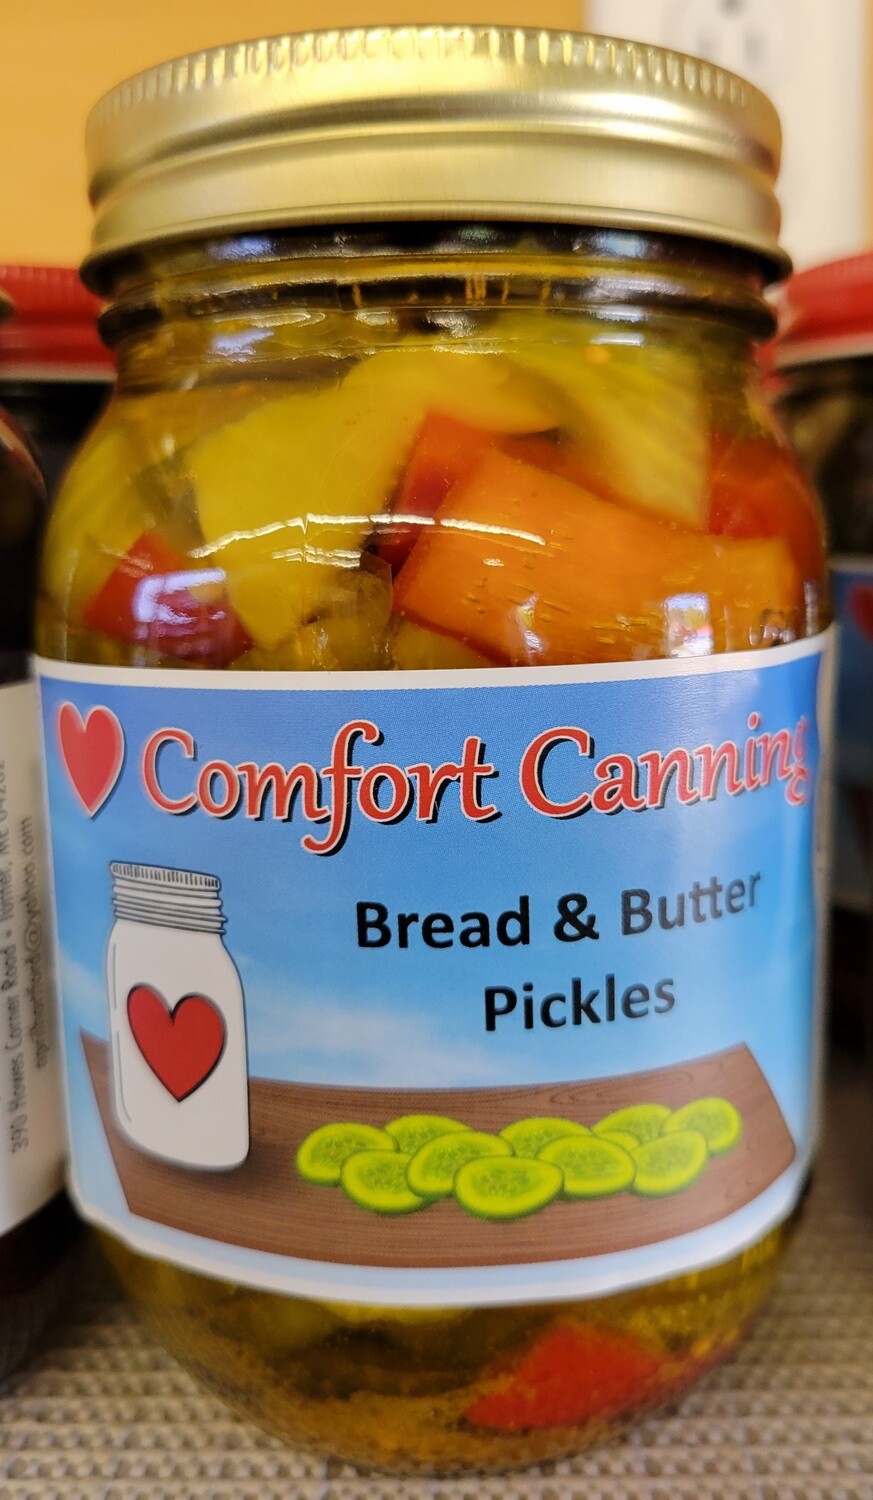 Comfort Canning - Bread & Butter Pickles